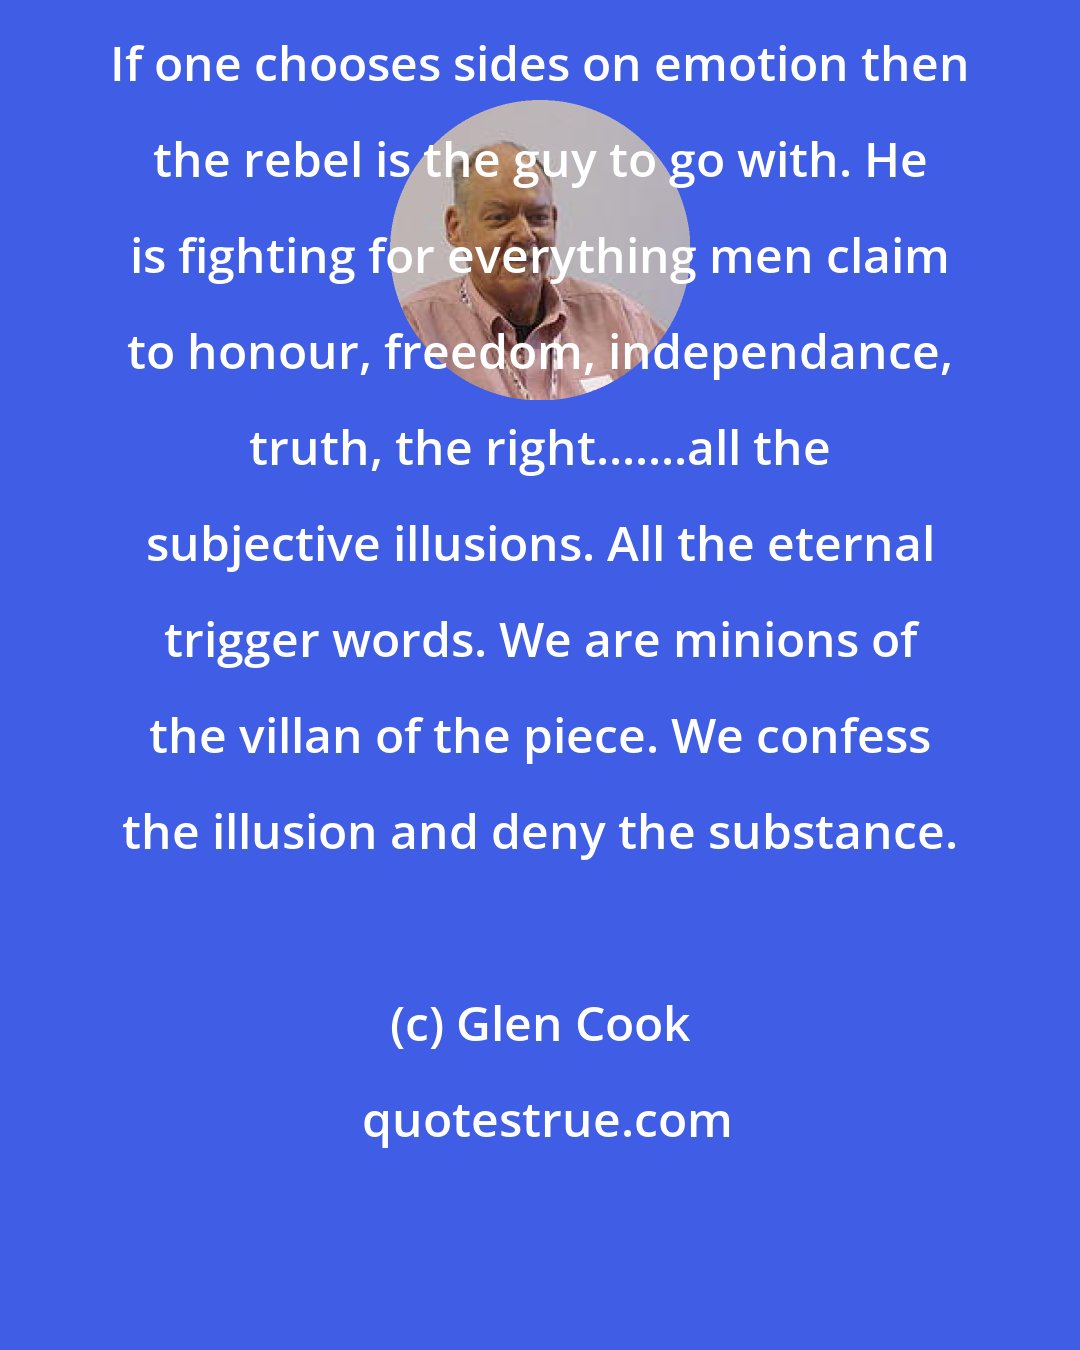 Glen Cook: If one chooses sides on emotion then the rebel is the guy to go with. He is fighting for everything men claim to honour, freedom, independance, truth, the right.......all the subjective illusions. All the eternal trigger words. We are minions of the villan of the piece. We confess the illusion and deny the substance.